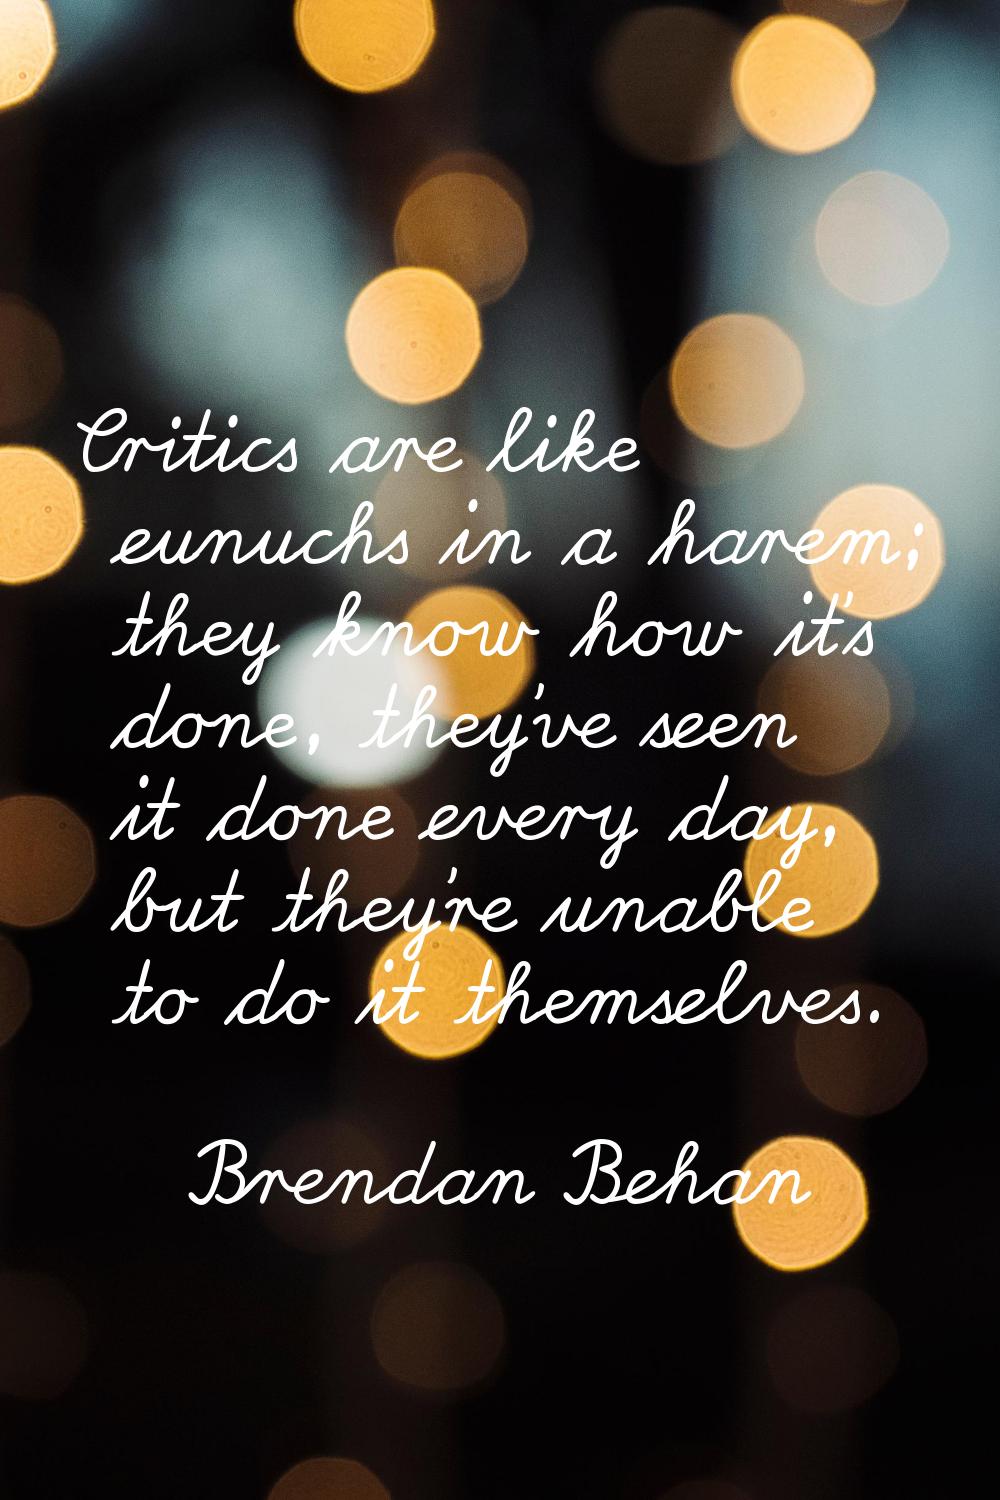 Critics are like eunuchs in a harem; they know how it's done, they've seen it done every day, but t